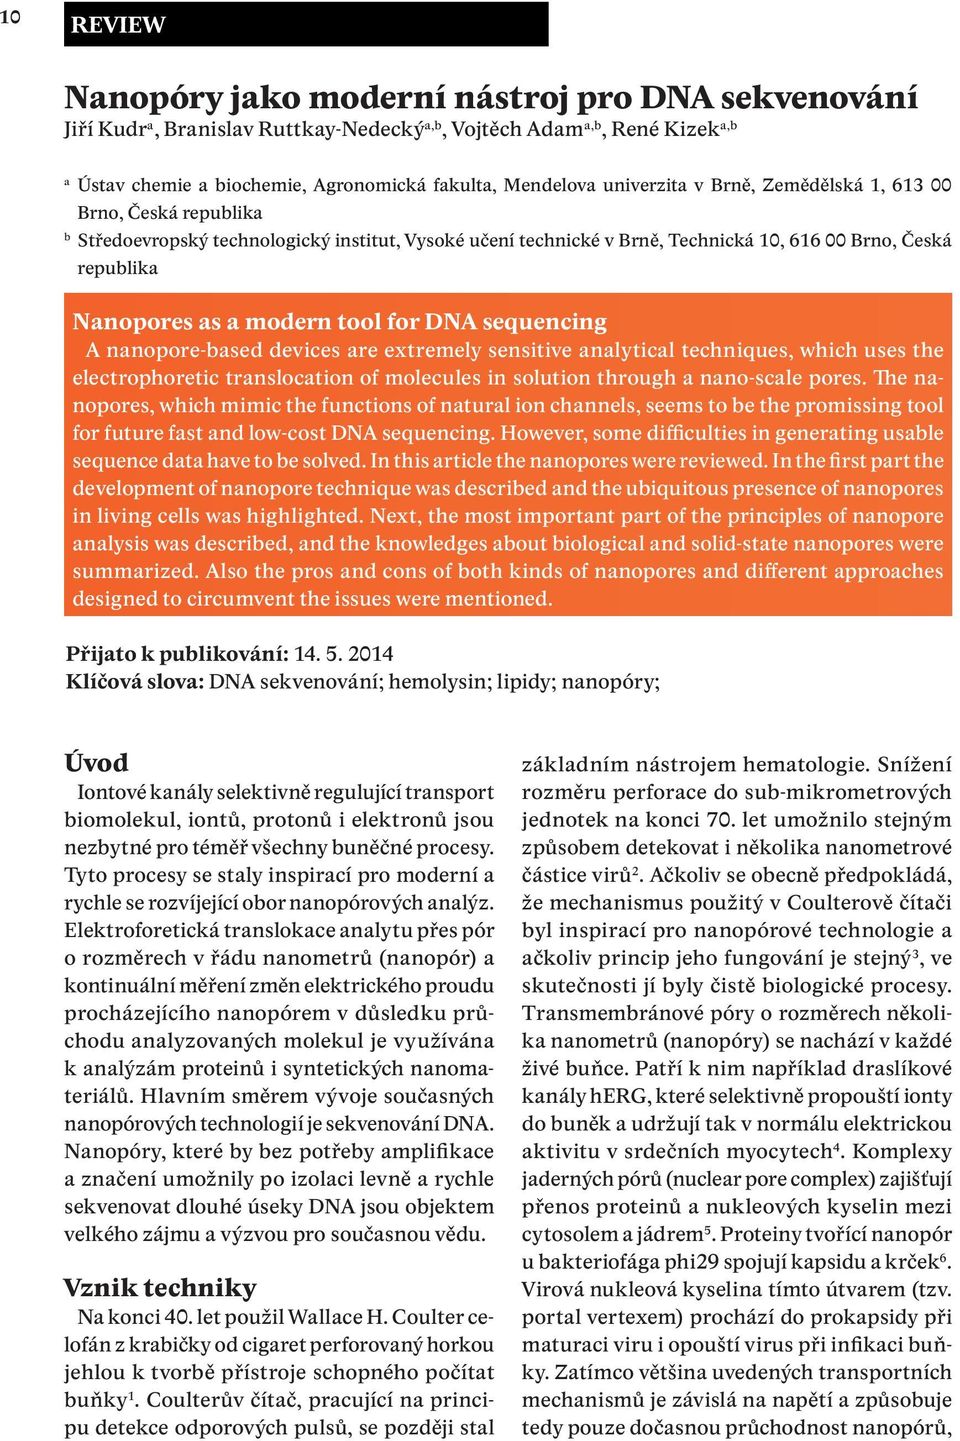 tool for DNA sequencing A nanopore-based devices are extremely sensitive analytical techniques, which uses the electrophoretic translocation of molecules in solution through a nano-scale pores.